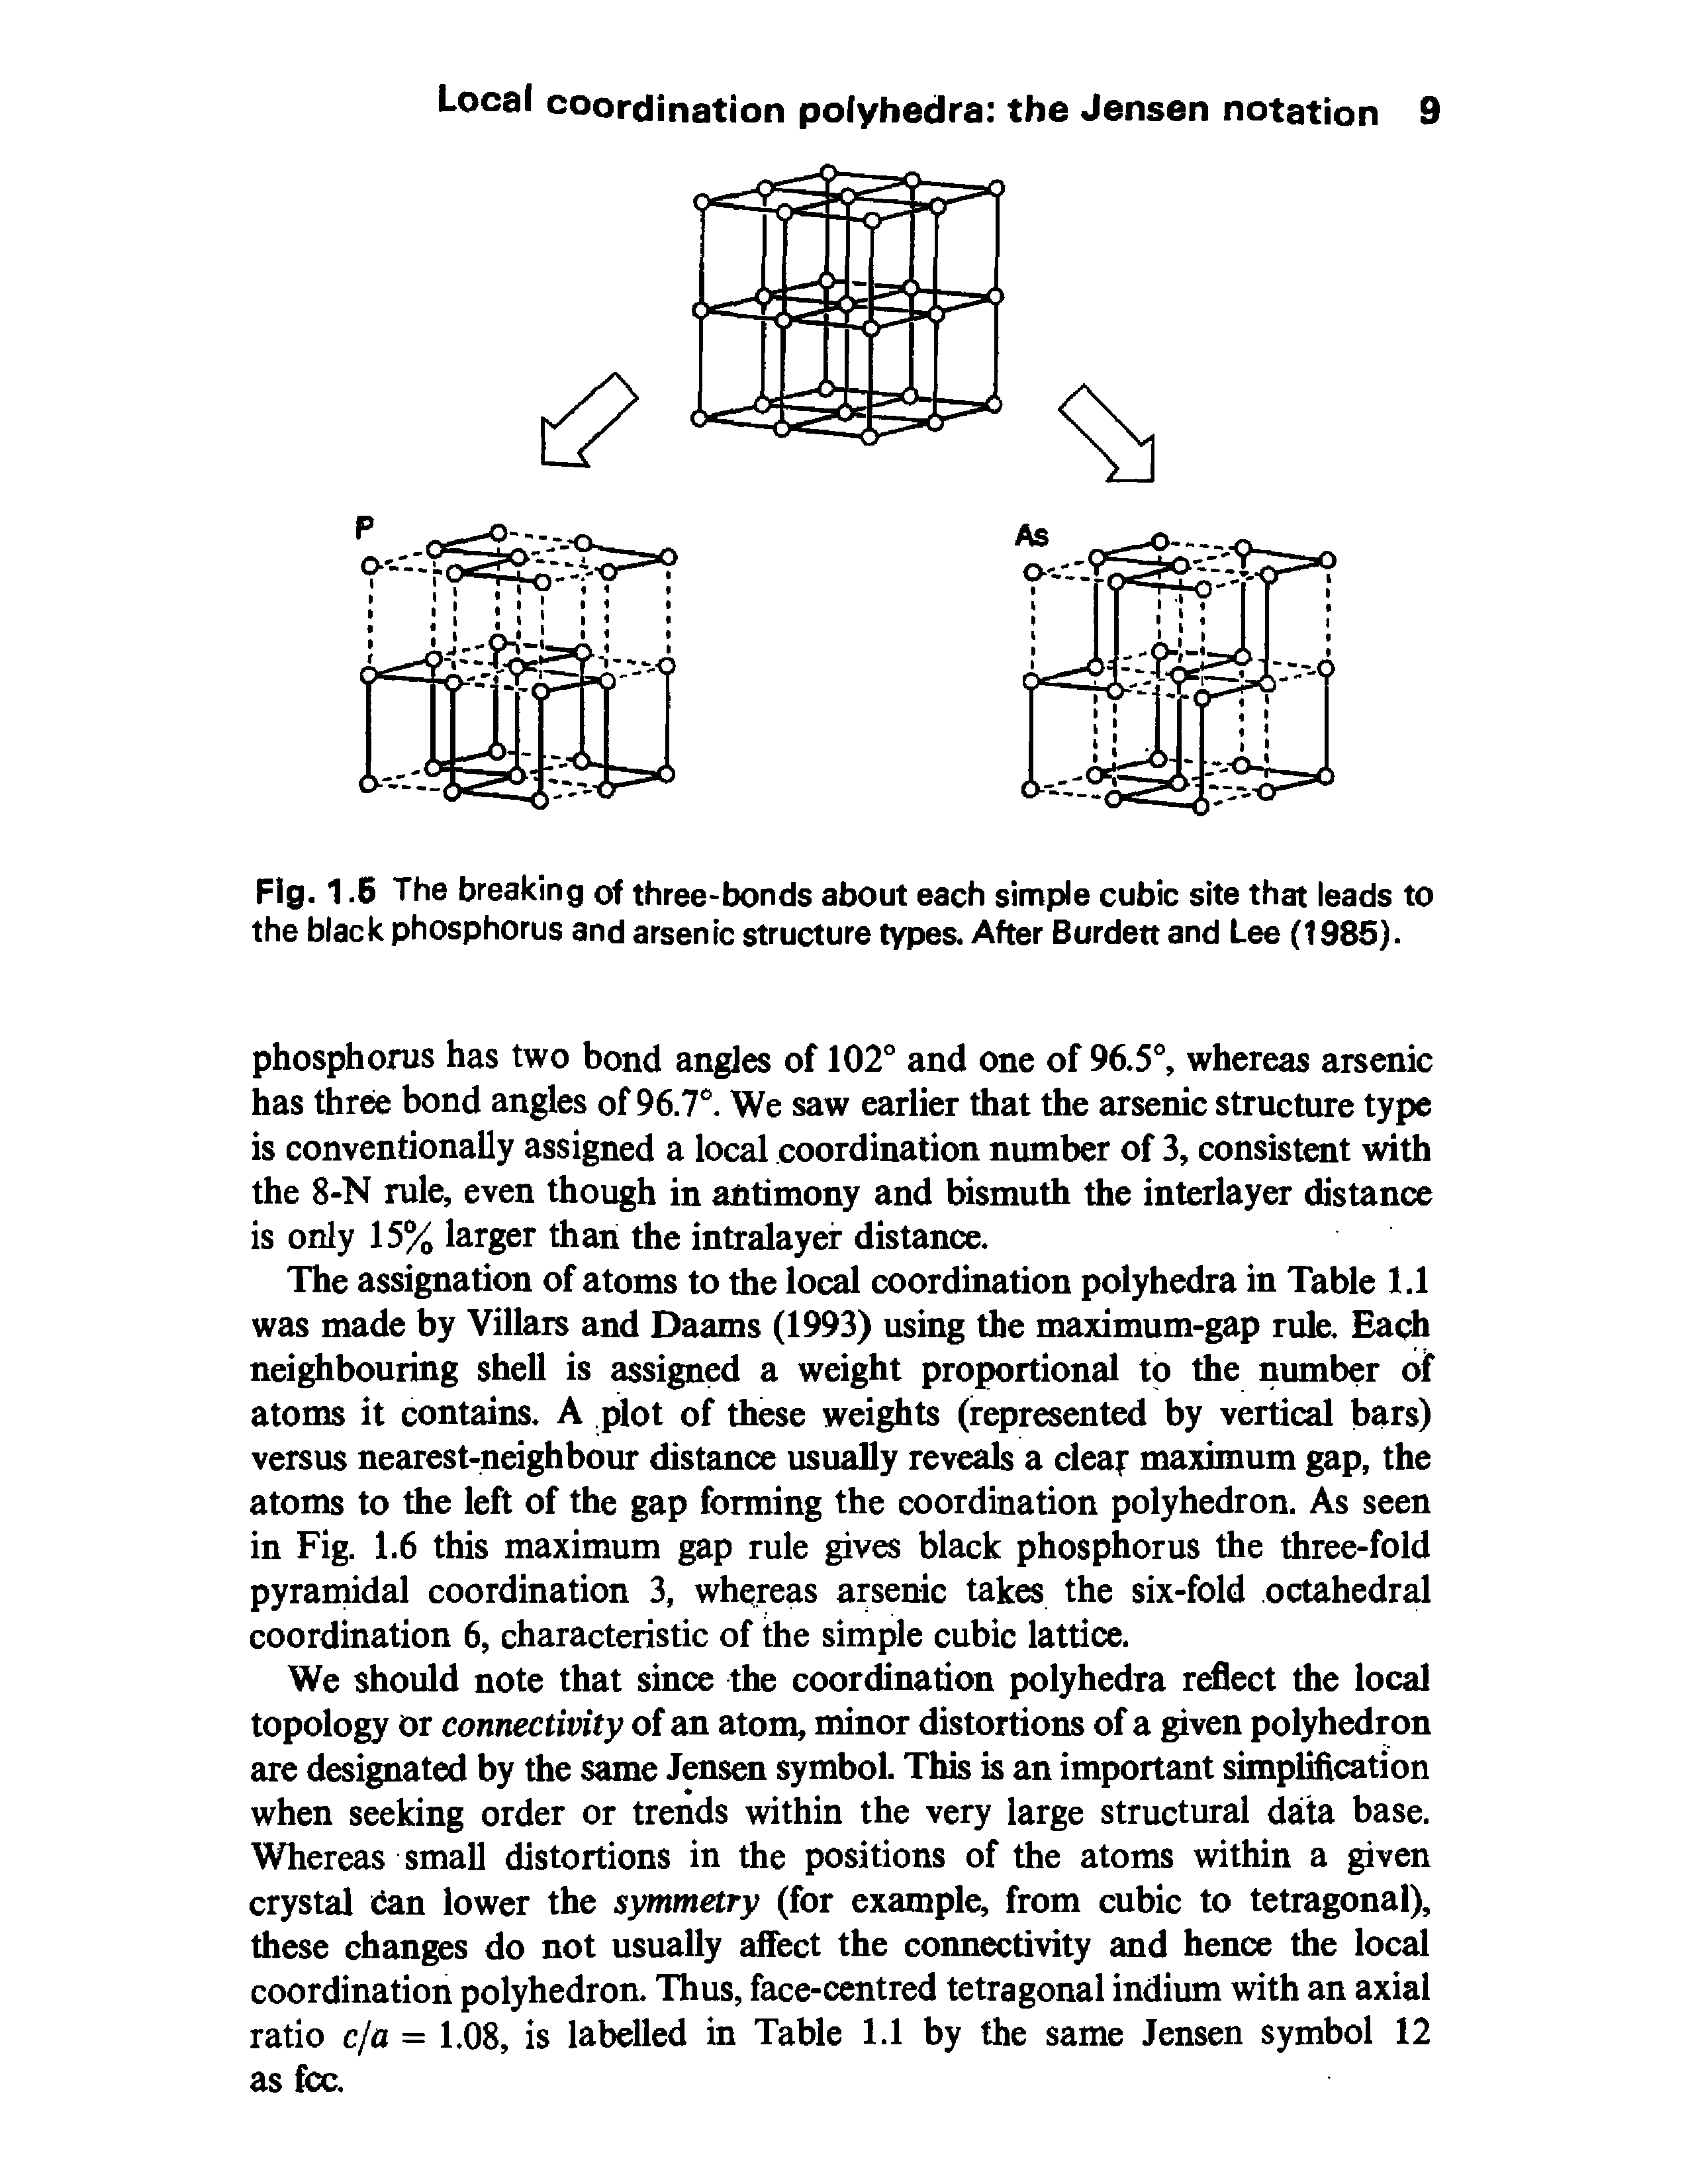 Fig. 1.6 The breaking of three-bonds about each simple cubic site that leads to the black phosphorus and arsenic structure types. After Burdett and Lee (1985).